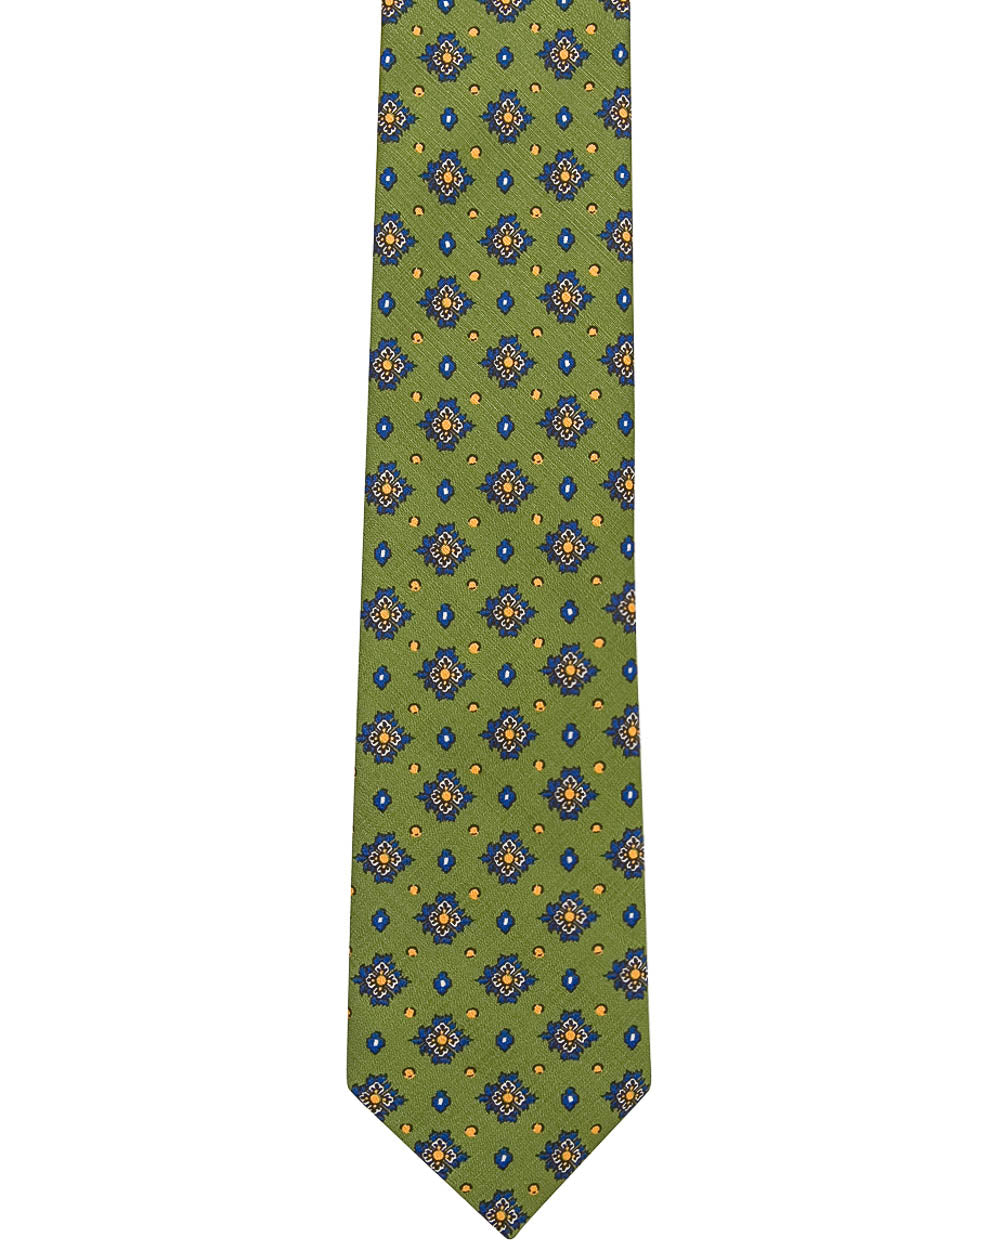 Emerald Dark Blue and Yellow Floral Tie